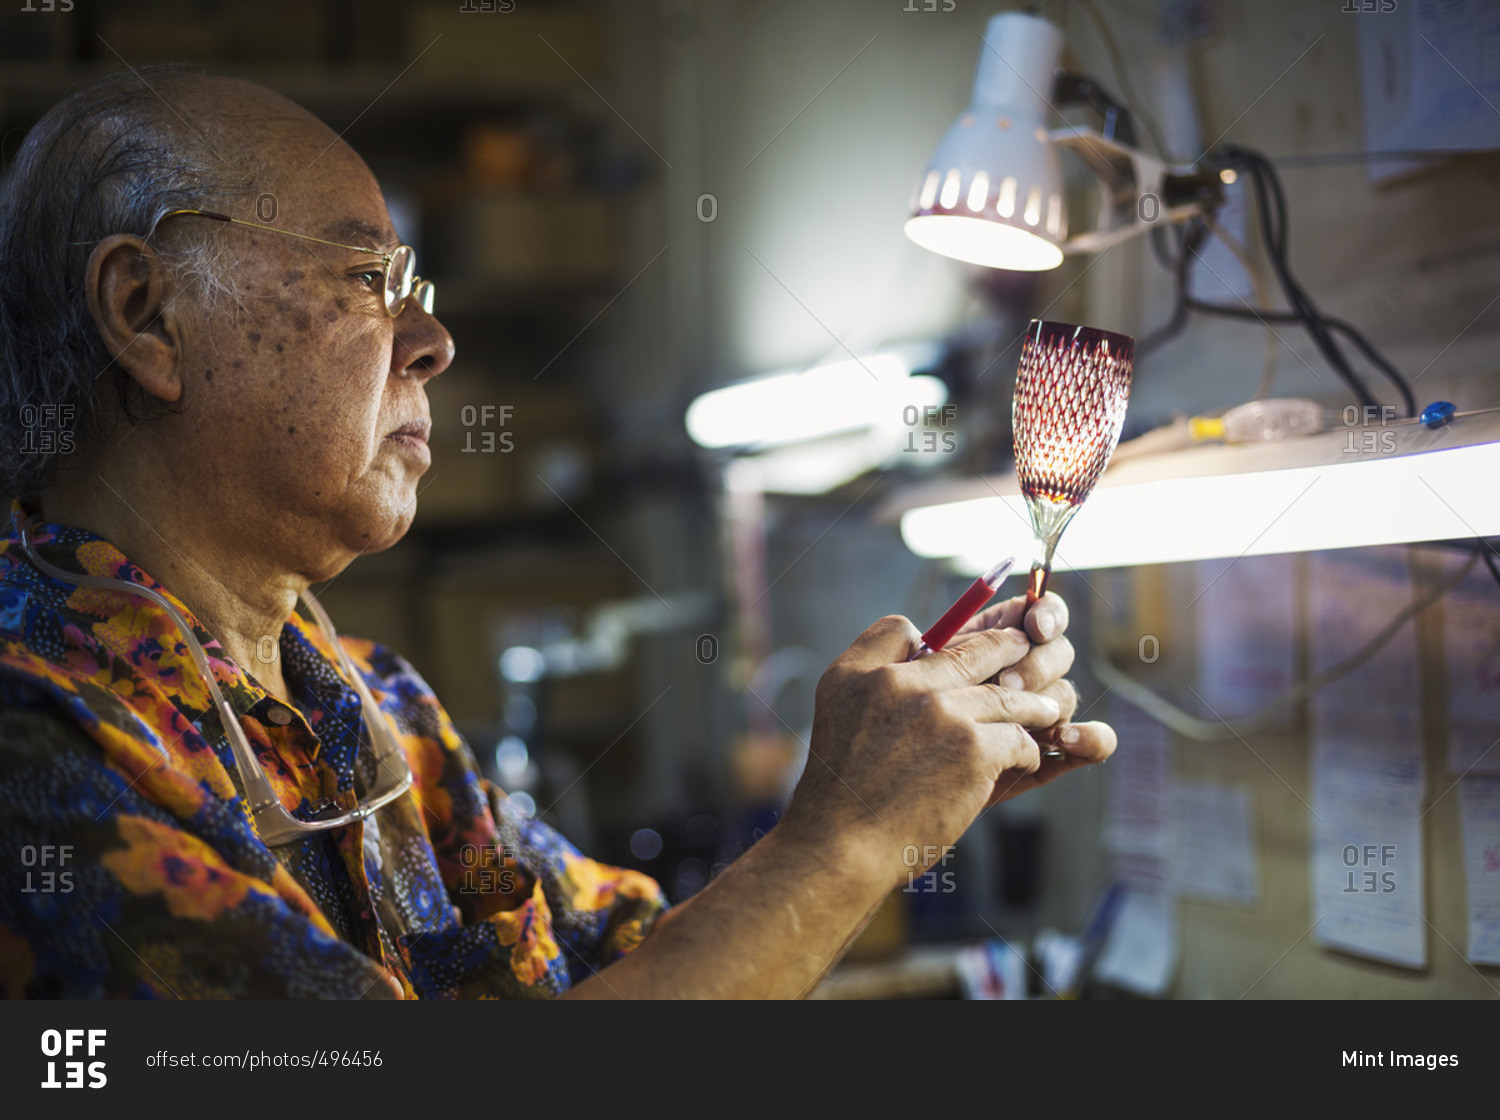 A senior craftsman at work in a glass maker\'s studio workshop, in inspecting red wine glass with cut glass decoration against the light.